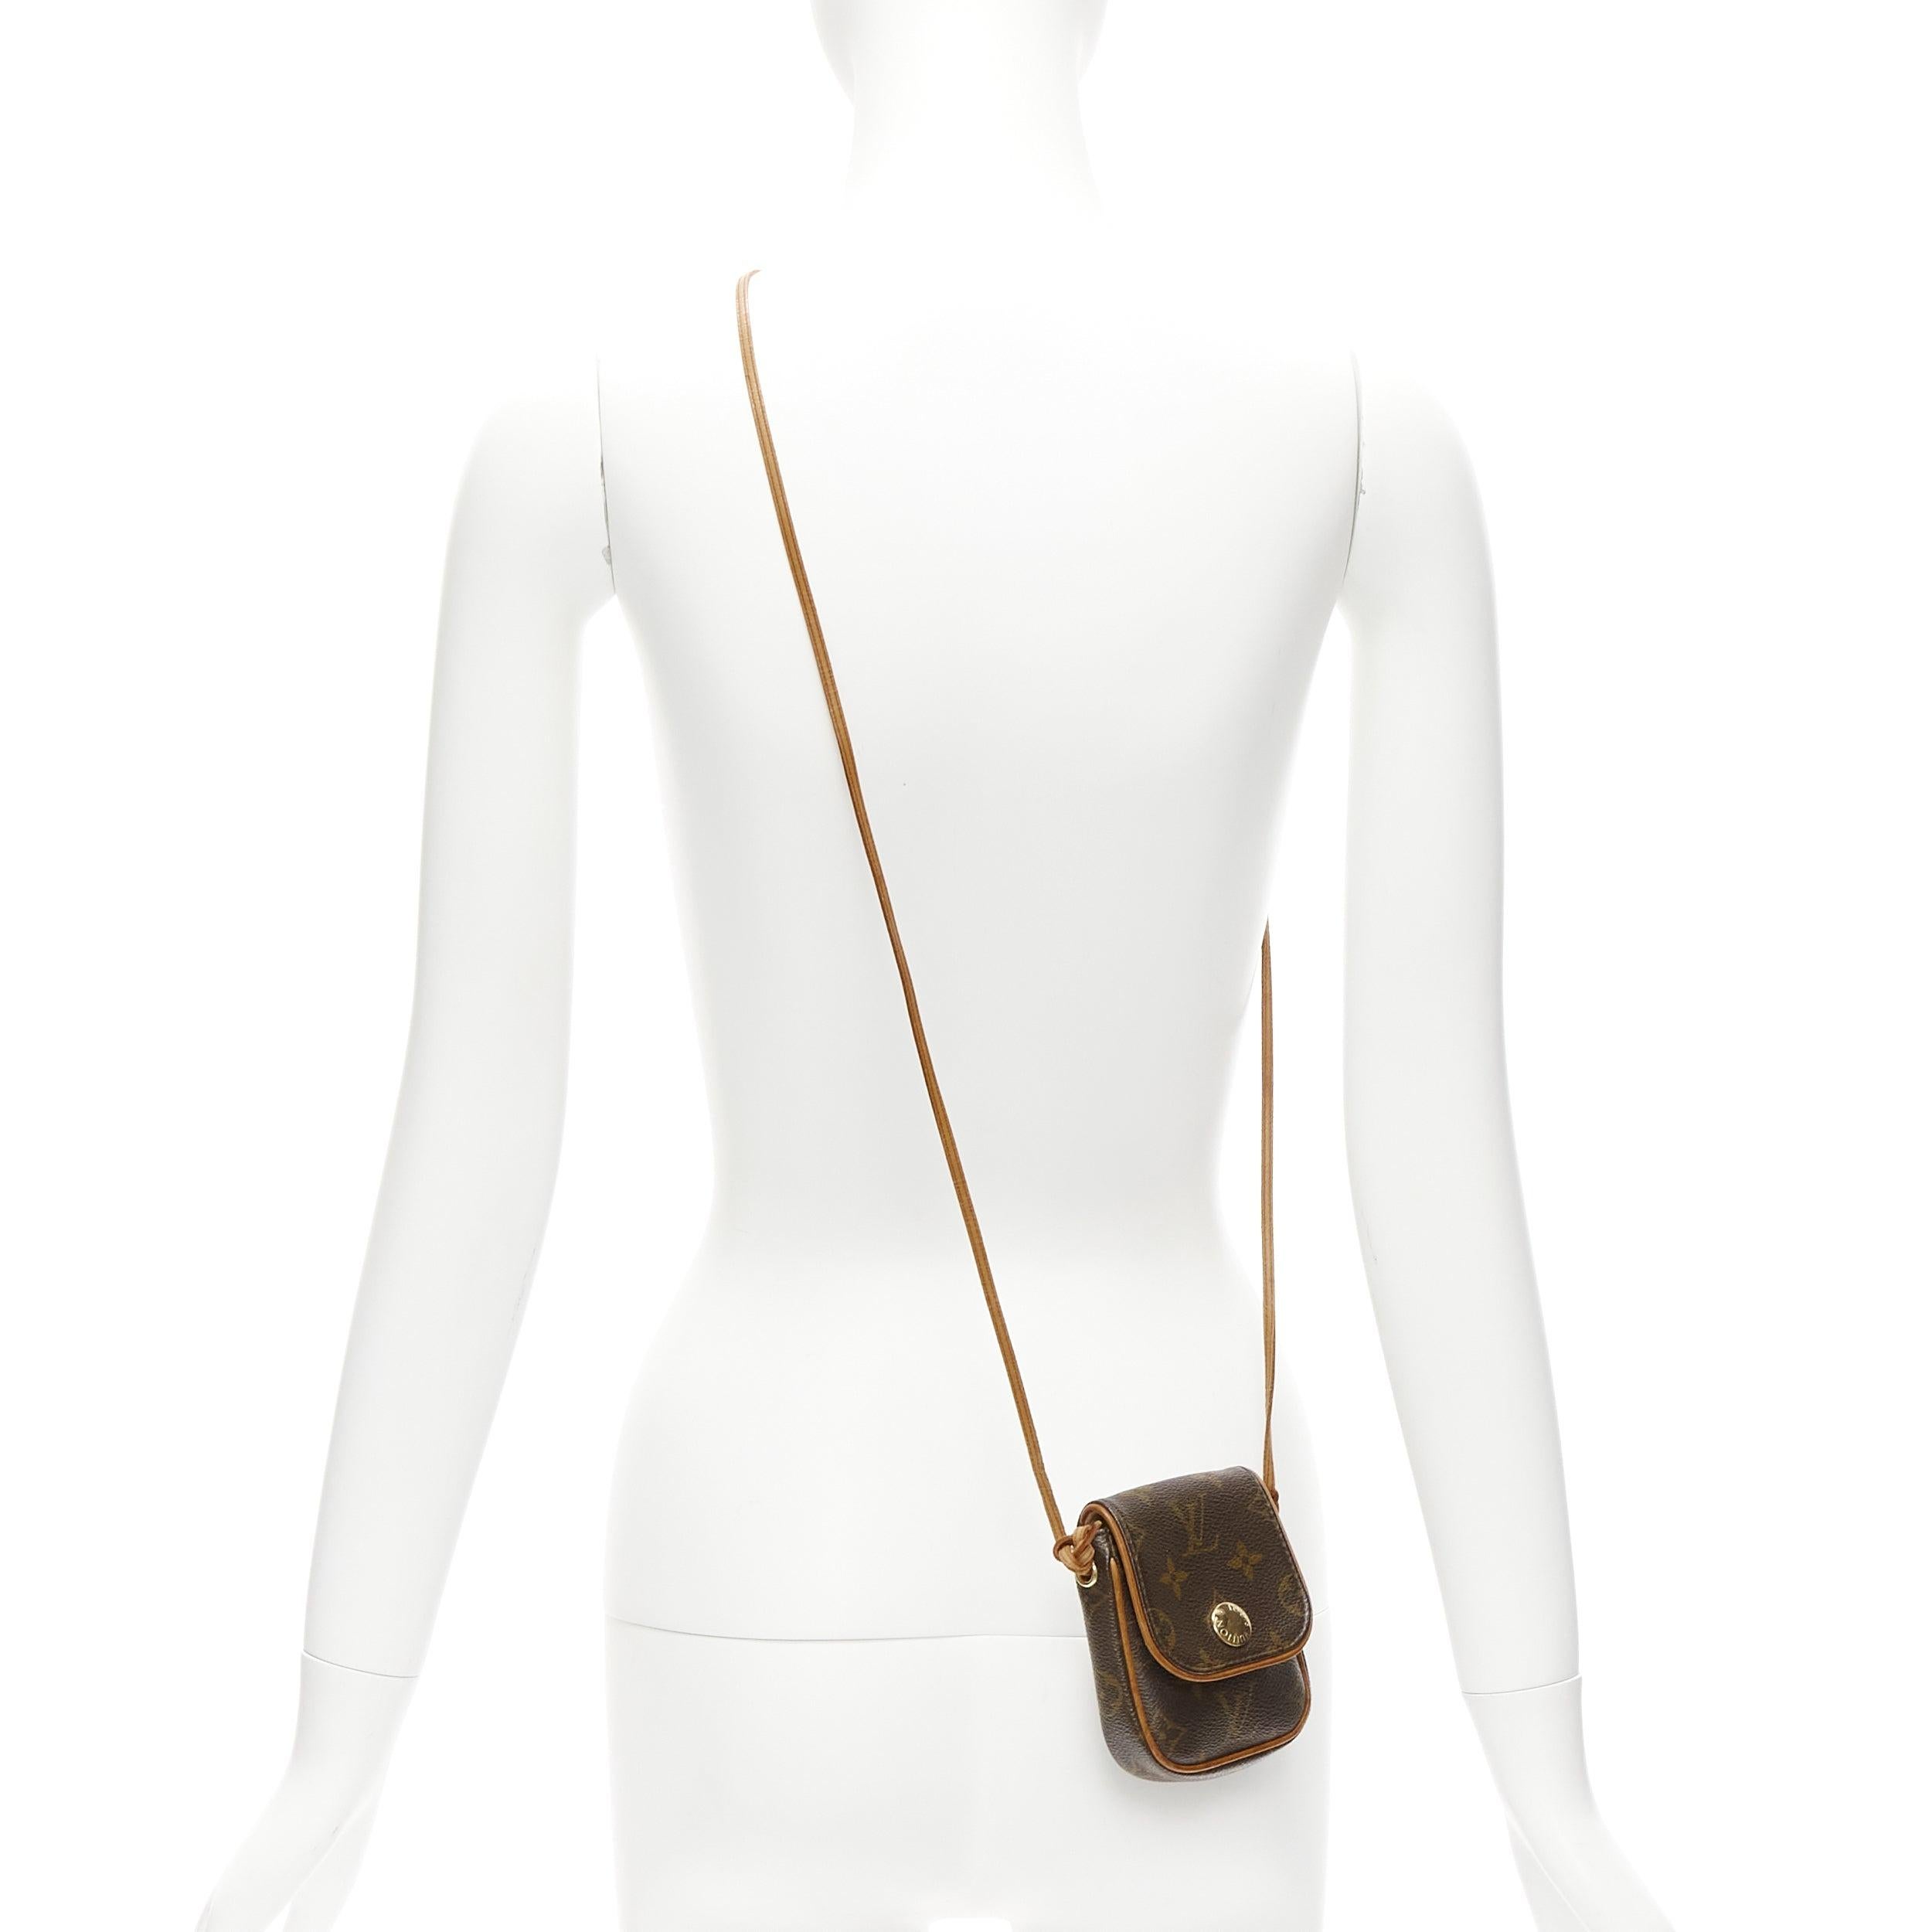 LOUIS VUITTON Cancun Pochette brown LV logo monogram mini crossbody bag
Reference: TGAS/D00861
Brand: Louis Vuitton
Model: Cancun Pochette
Material: Leather, Canvas
Color: Brown
Pattern: Monogram
Closure: Snap Buttons
Lining: Beige Leather
Made in: